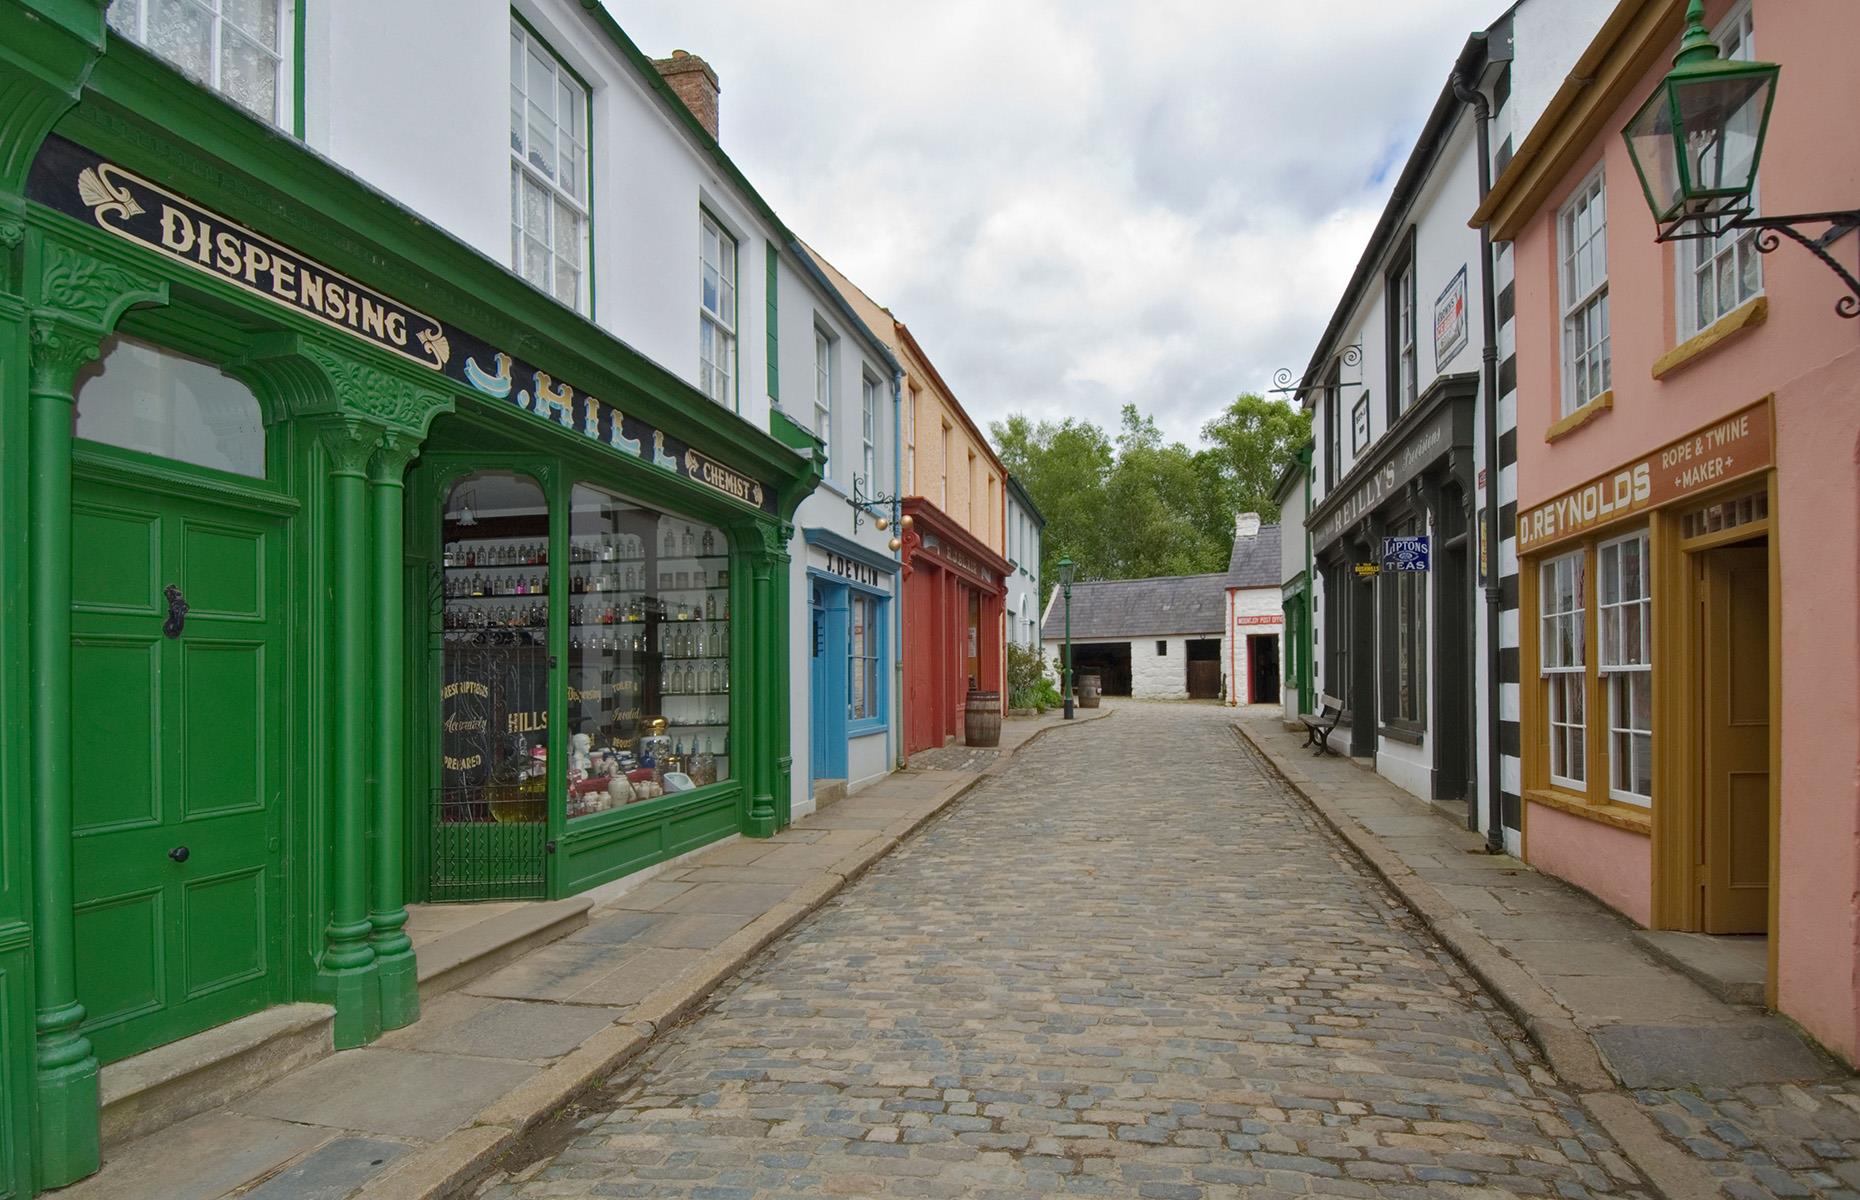 <p>Moving away from Belfast and into County Tyrone (around 1 hour 20 from Belfast by car), you’ll find another activity that’s perfect for the whole family – the <a href="https://www.ulsteramericanfolkpark.org/">Ulster American Folk Park</a>. Popular with international tourists as well as locals, this living history museum recreates rural Irish life in the 18<sup>th</sup> century and charts the Irish immigrant’s journey from County Tyrone across the Atlantic to the American frontier.</p>  <p>Throughout the museum’s collection of authentic 18<sup>th</sup> and 19<sup>th</sup> century buildings, costumed interpreters perform daily chores and regale guests with stories from the past.</p>